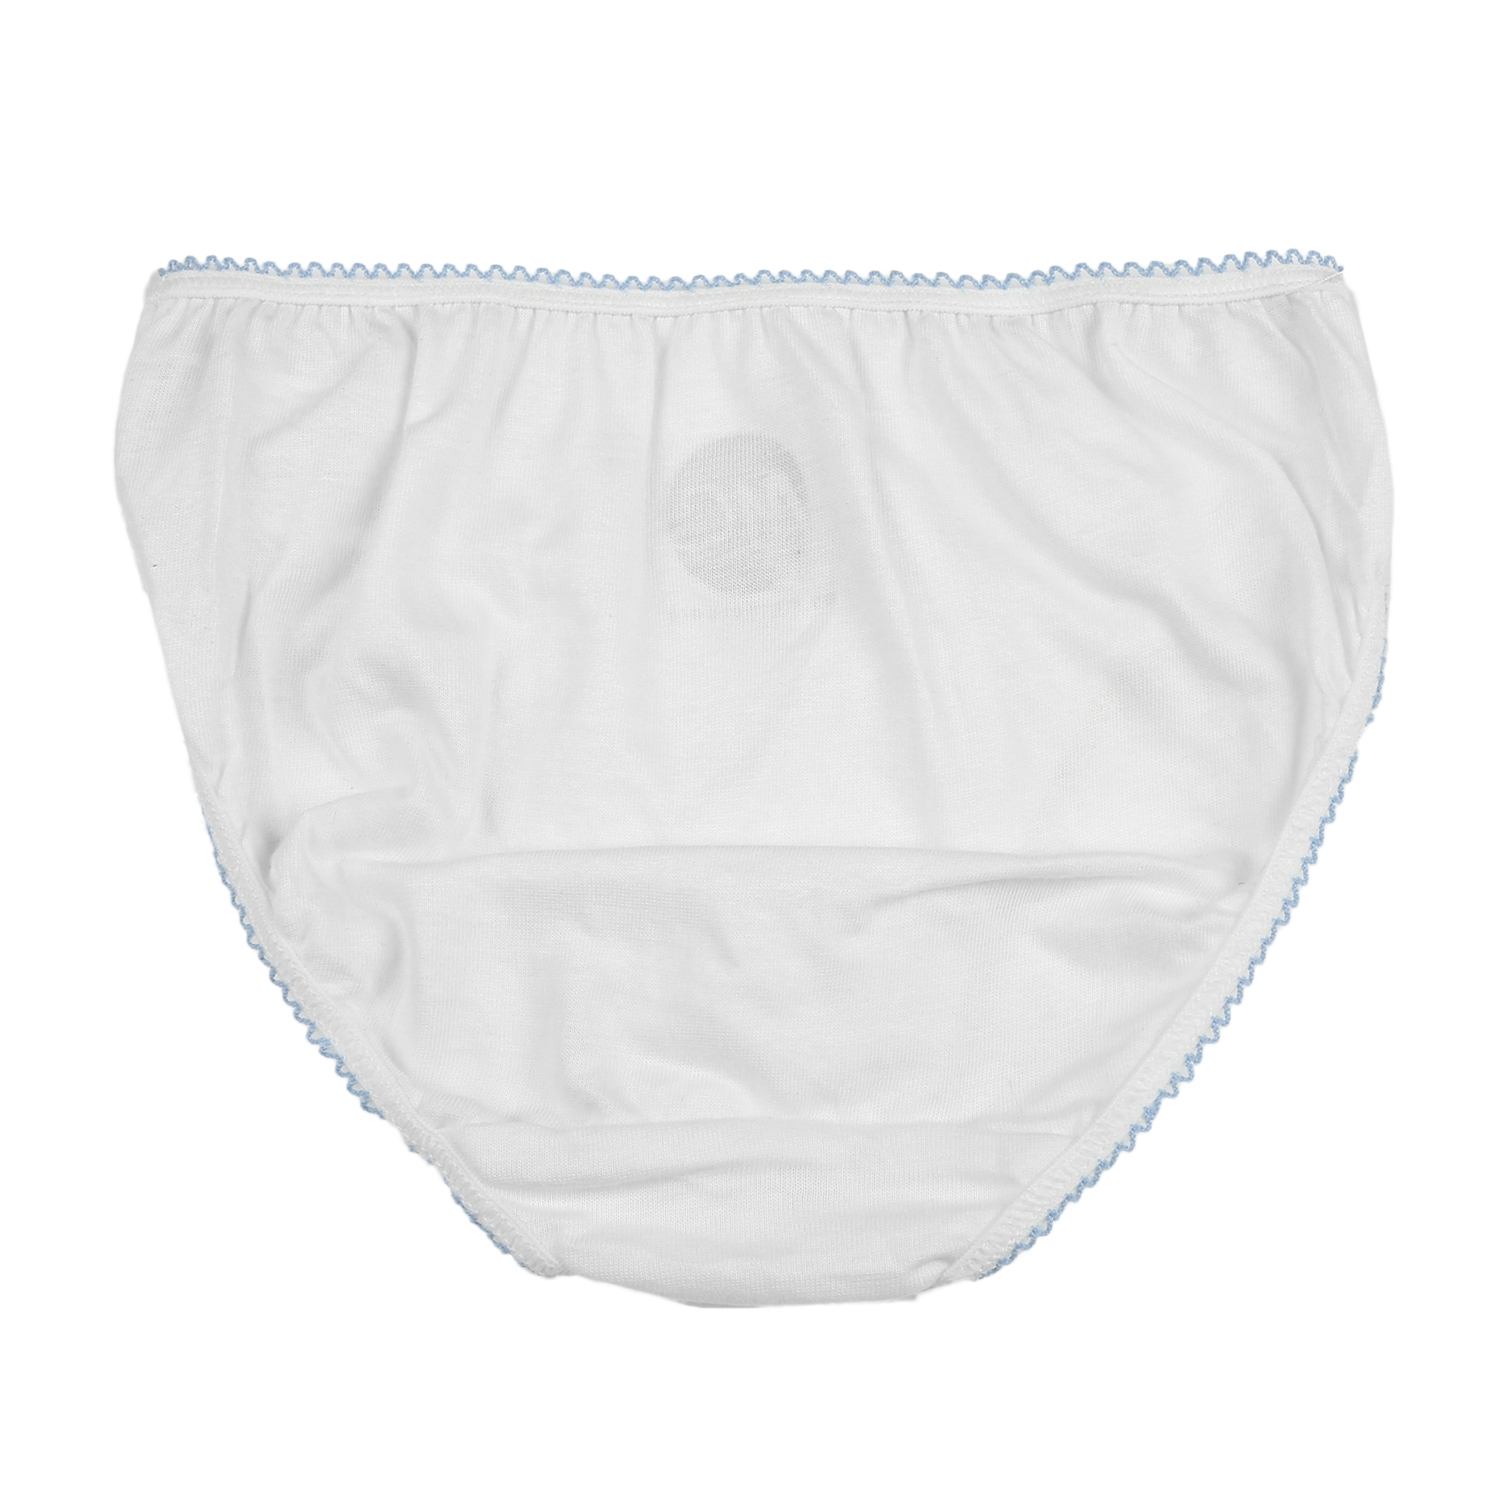 Mothercare | Girls Floral print Briefs - Pack of 3 - Blue white 5